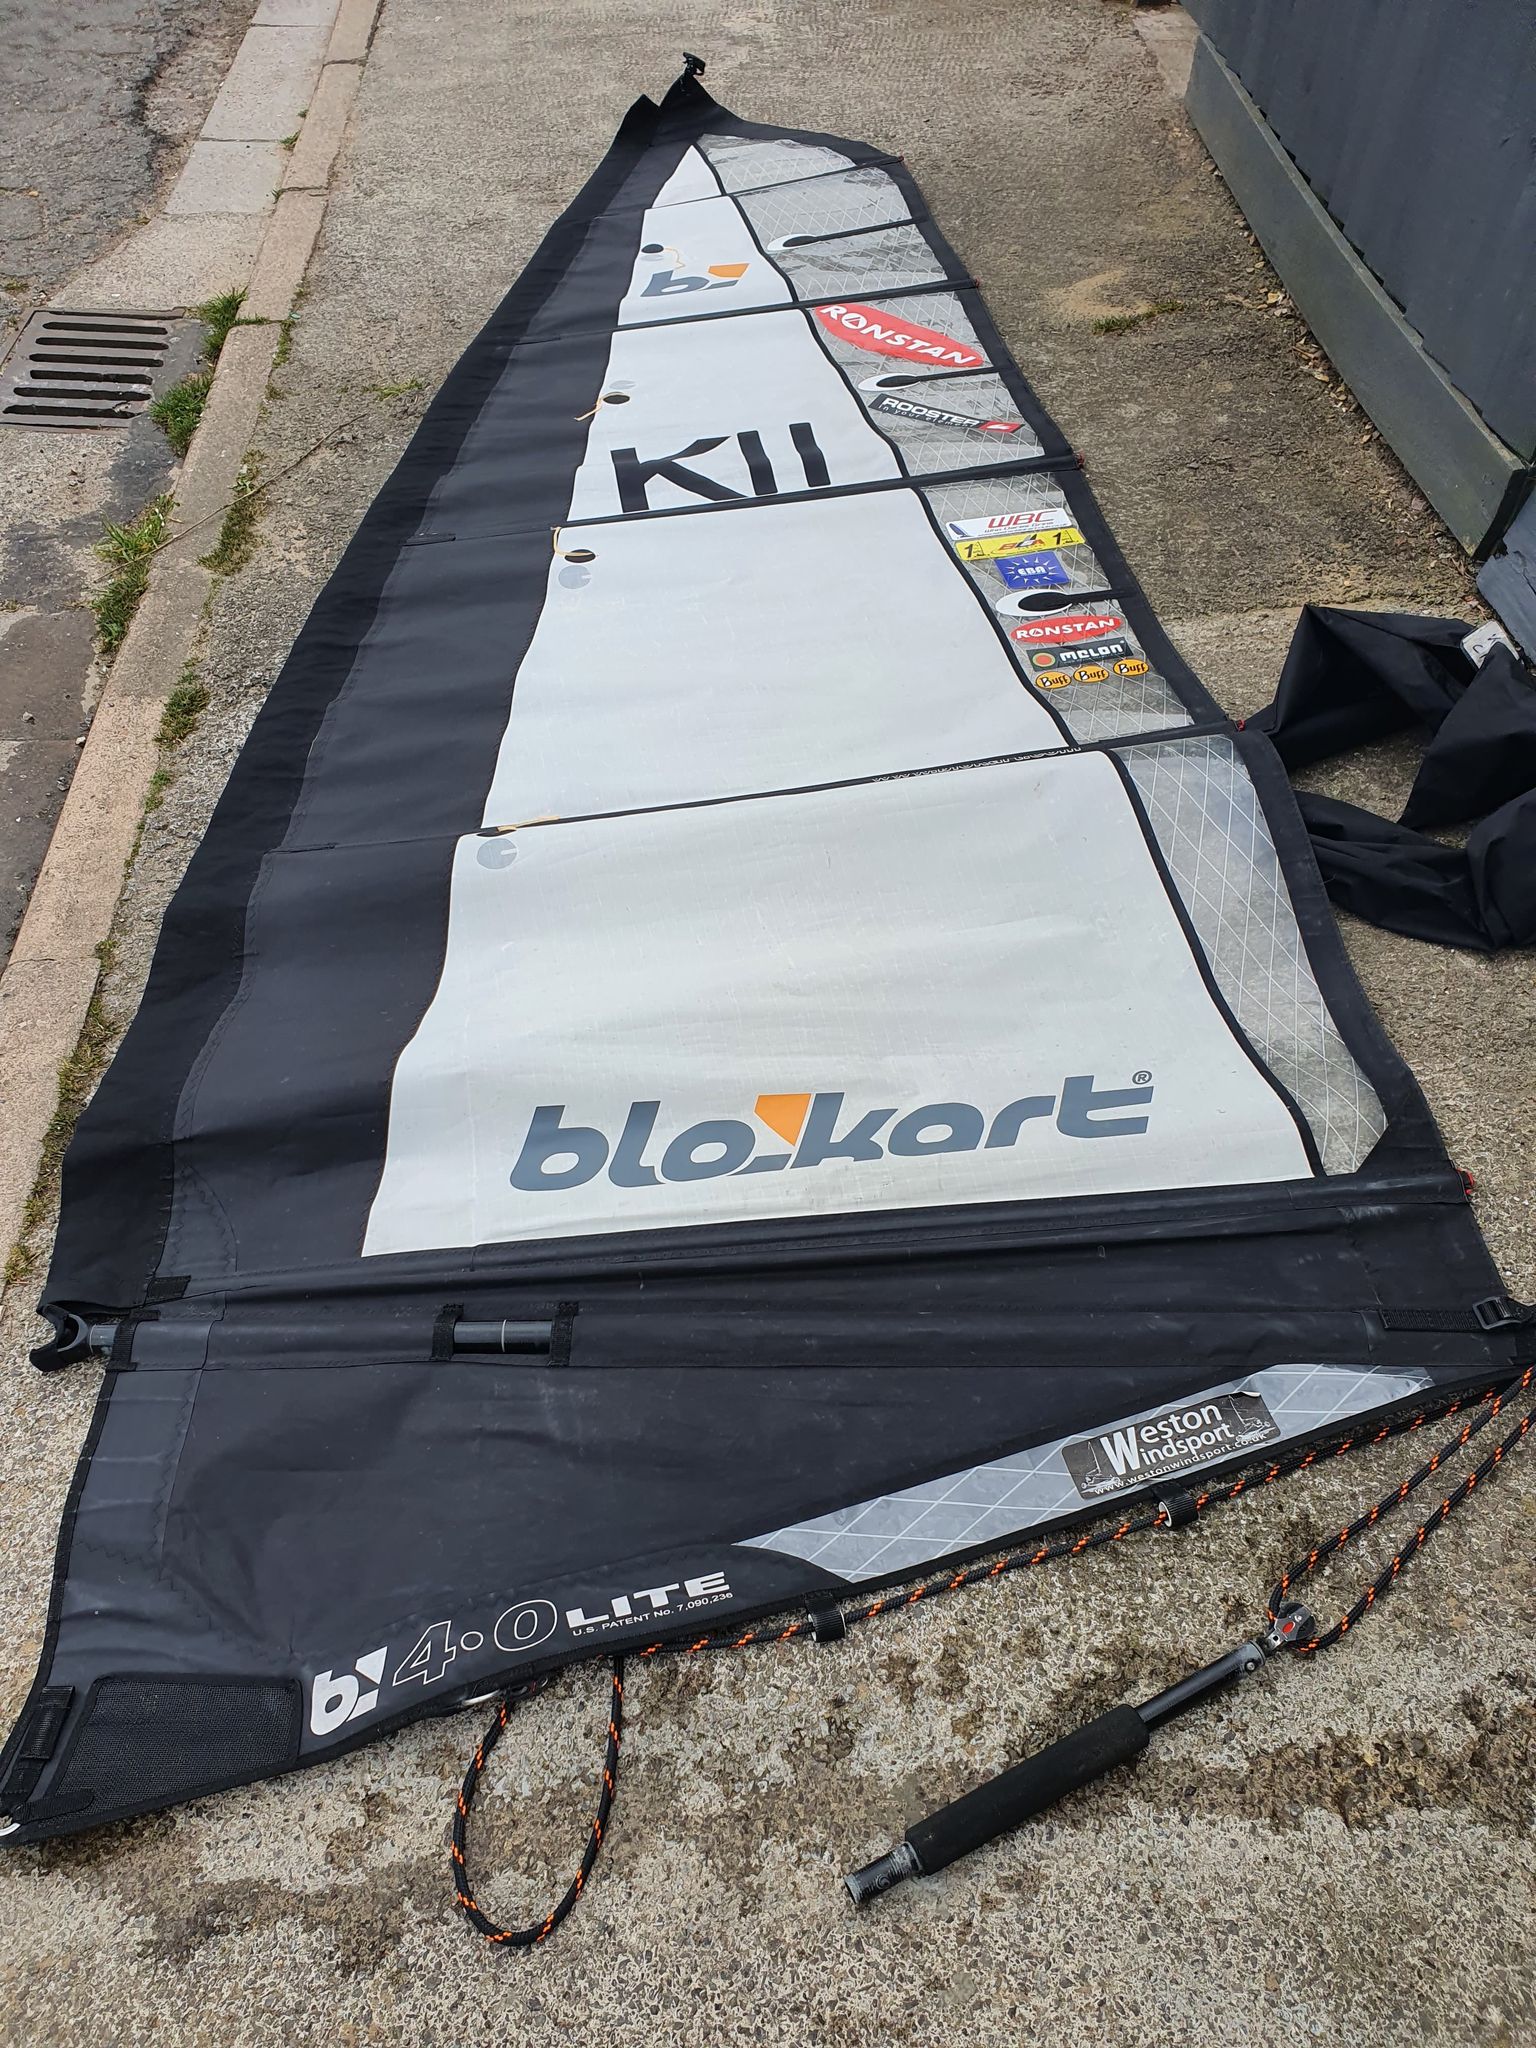 4m sail including perf batten tensioners